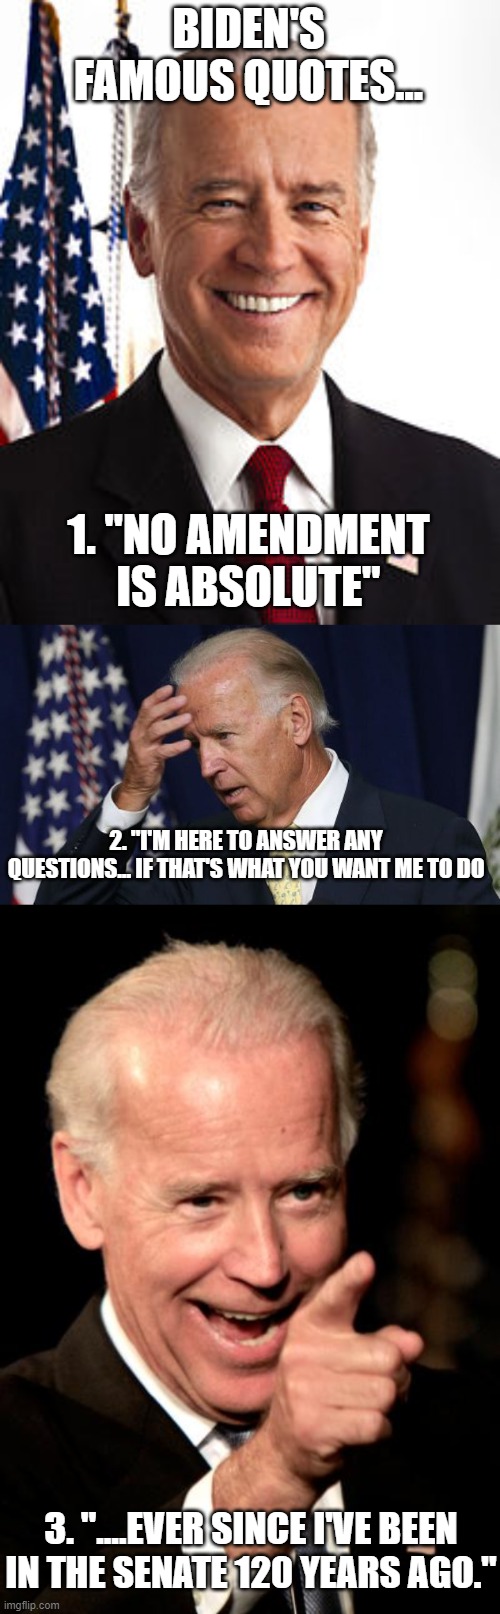 Biden's famous quotes! | BIDEN'S FAMOUS QUOTES... 1. "NO AMENDMENT IS ABSOLUTE"; 2. "I'M HERE TO ANSWER ANY QUESTIONS... IF THAT'S WHAT YOU WANT ME TO DO; 3. "....EVER SINCE I'VE BEEN IN THE SENATE 120 YEARS AGO." | image tagged in memes,joe biden,joe biden worries,smilin biden | made w/ Imgflip meme maker